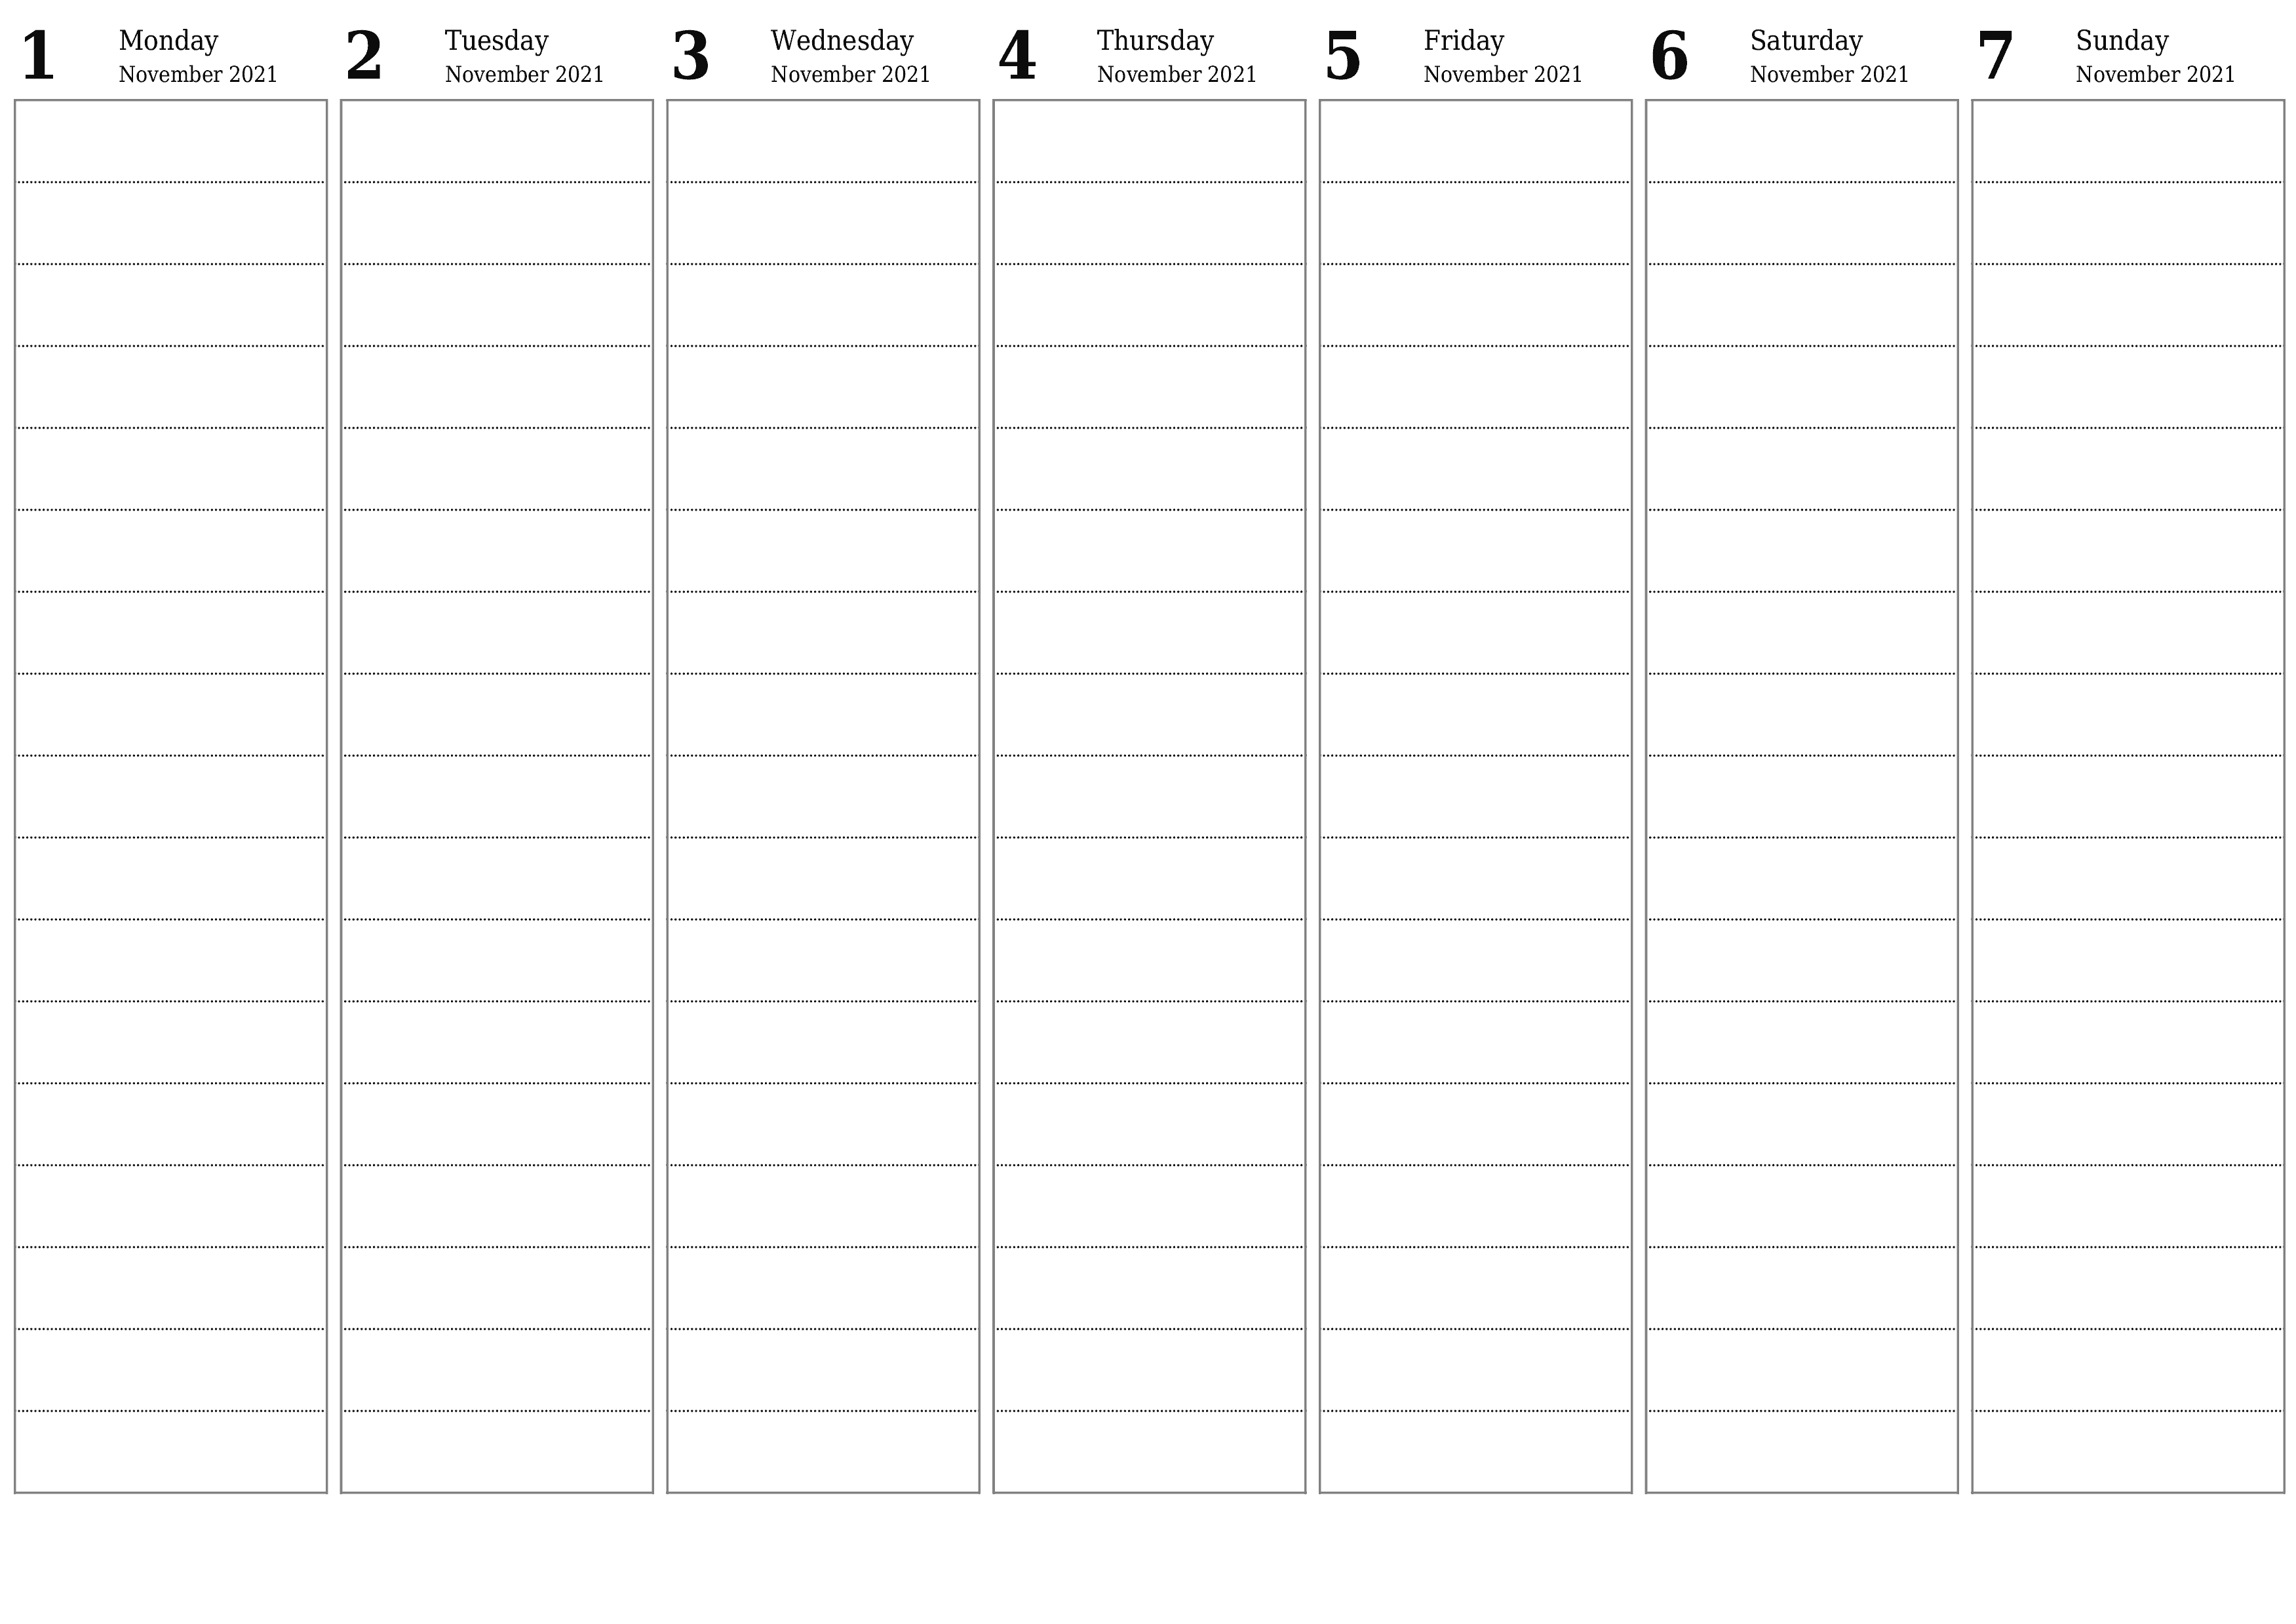 Blank weekly printable calendar and planner for week November 2021 with notes, save and print to PDF PNG English - 7calendar.com